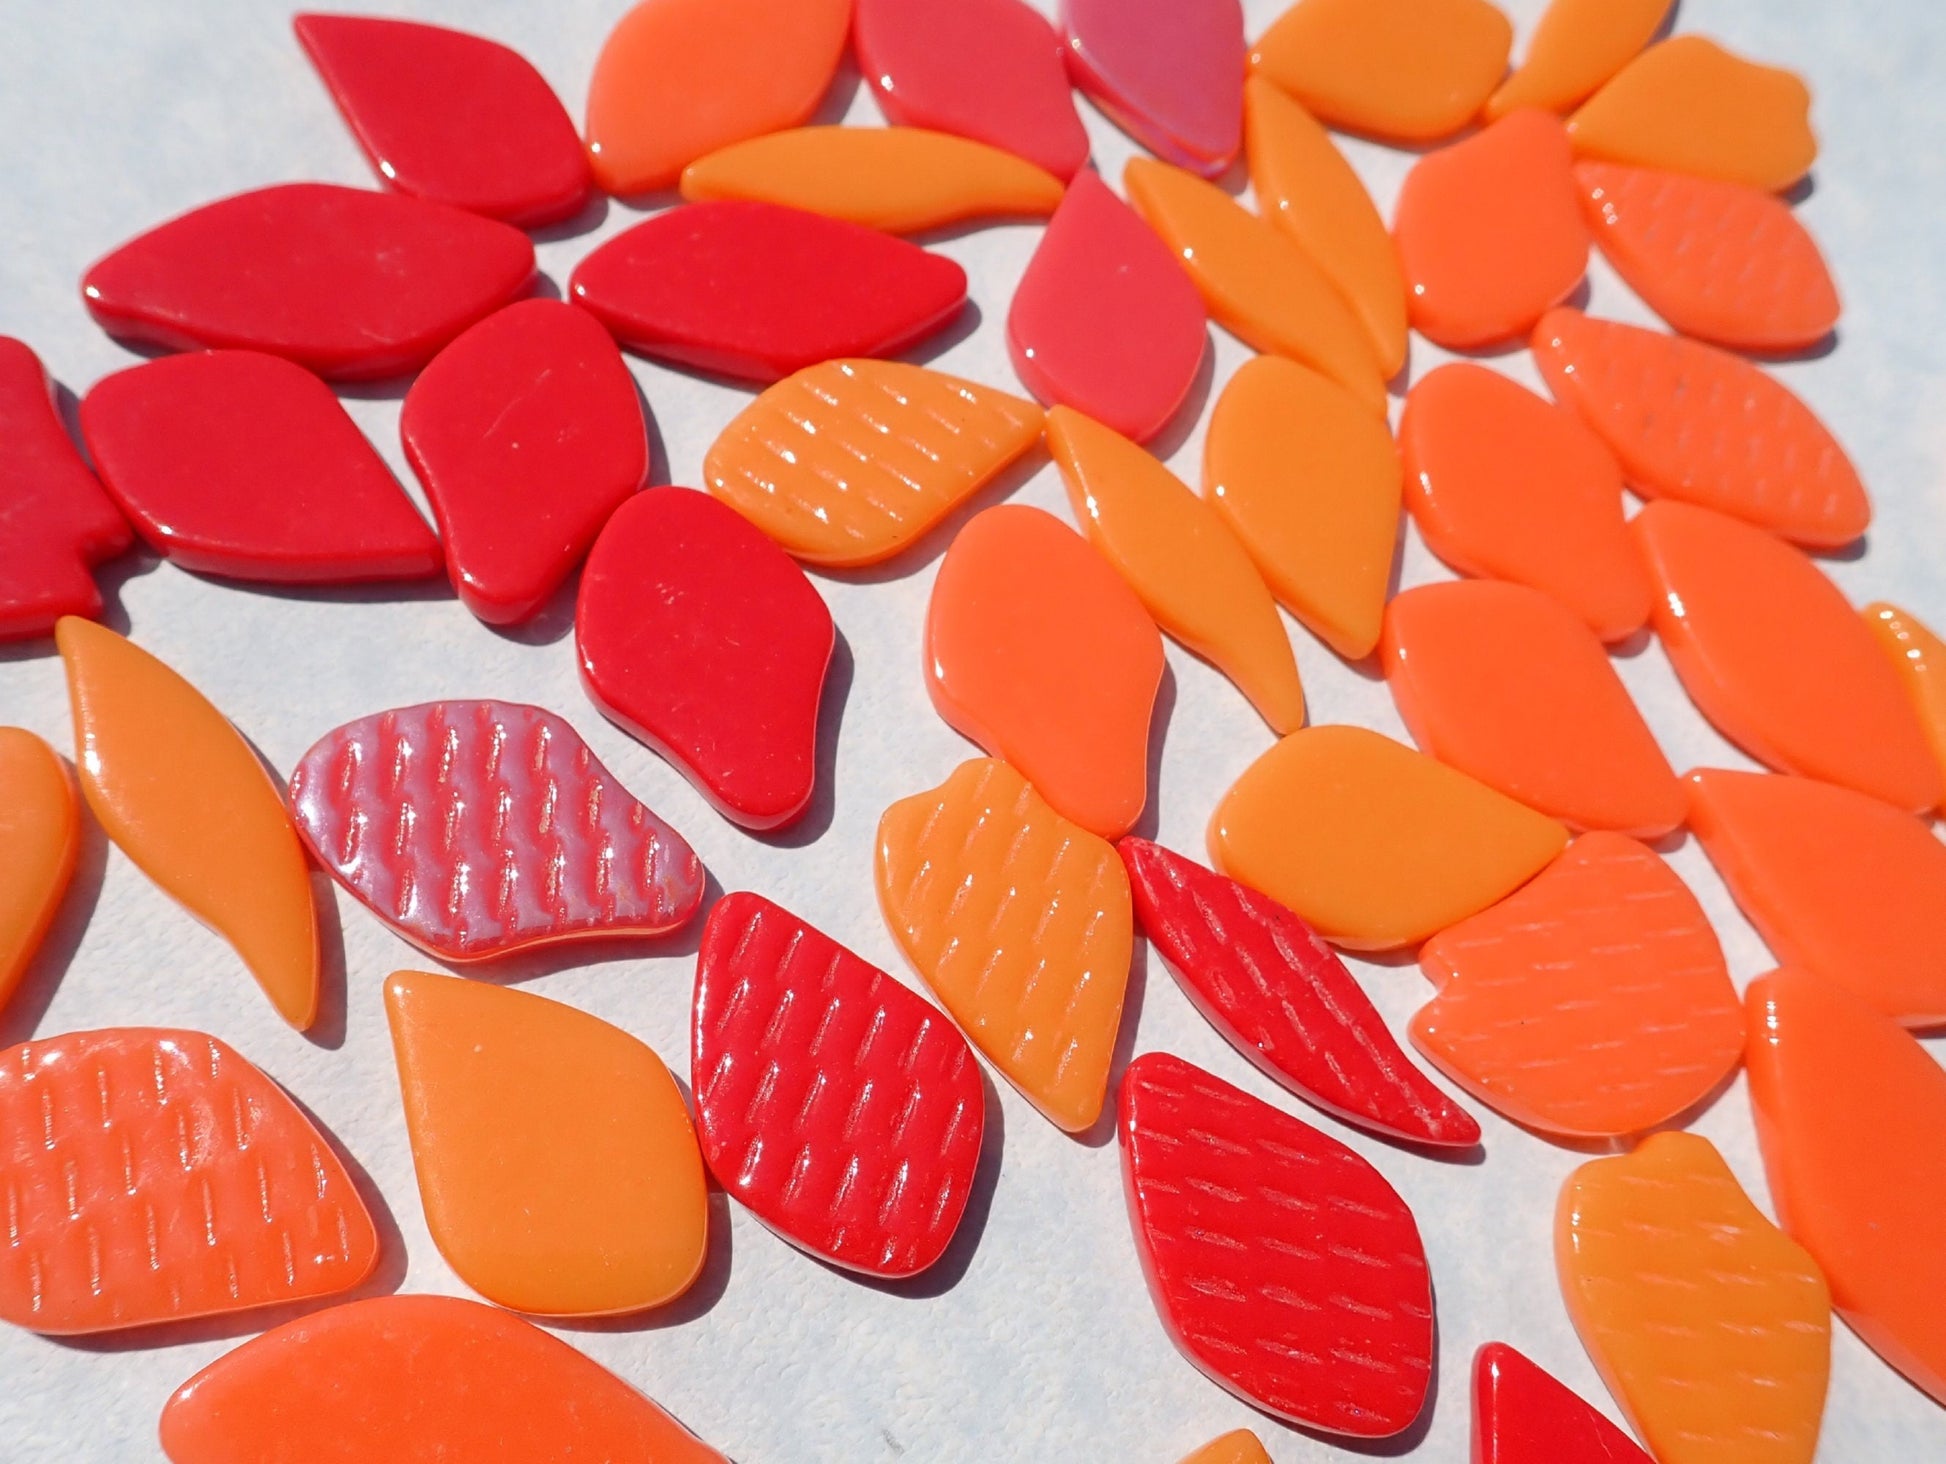 Orange and Red Glass Petals - 50g of Leaves in a Mix of Shapes and Sizes - Nasturtium Bouquet